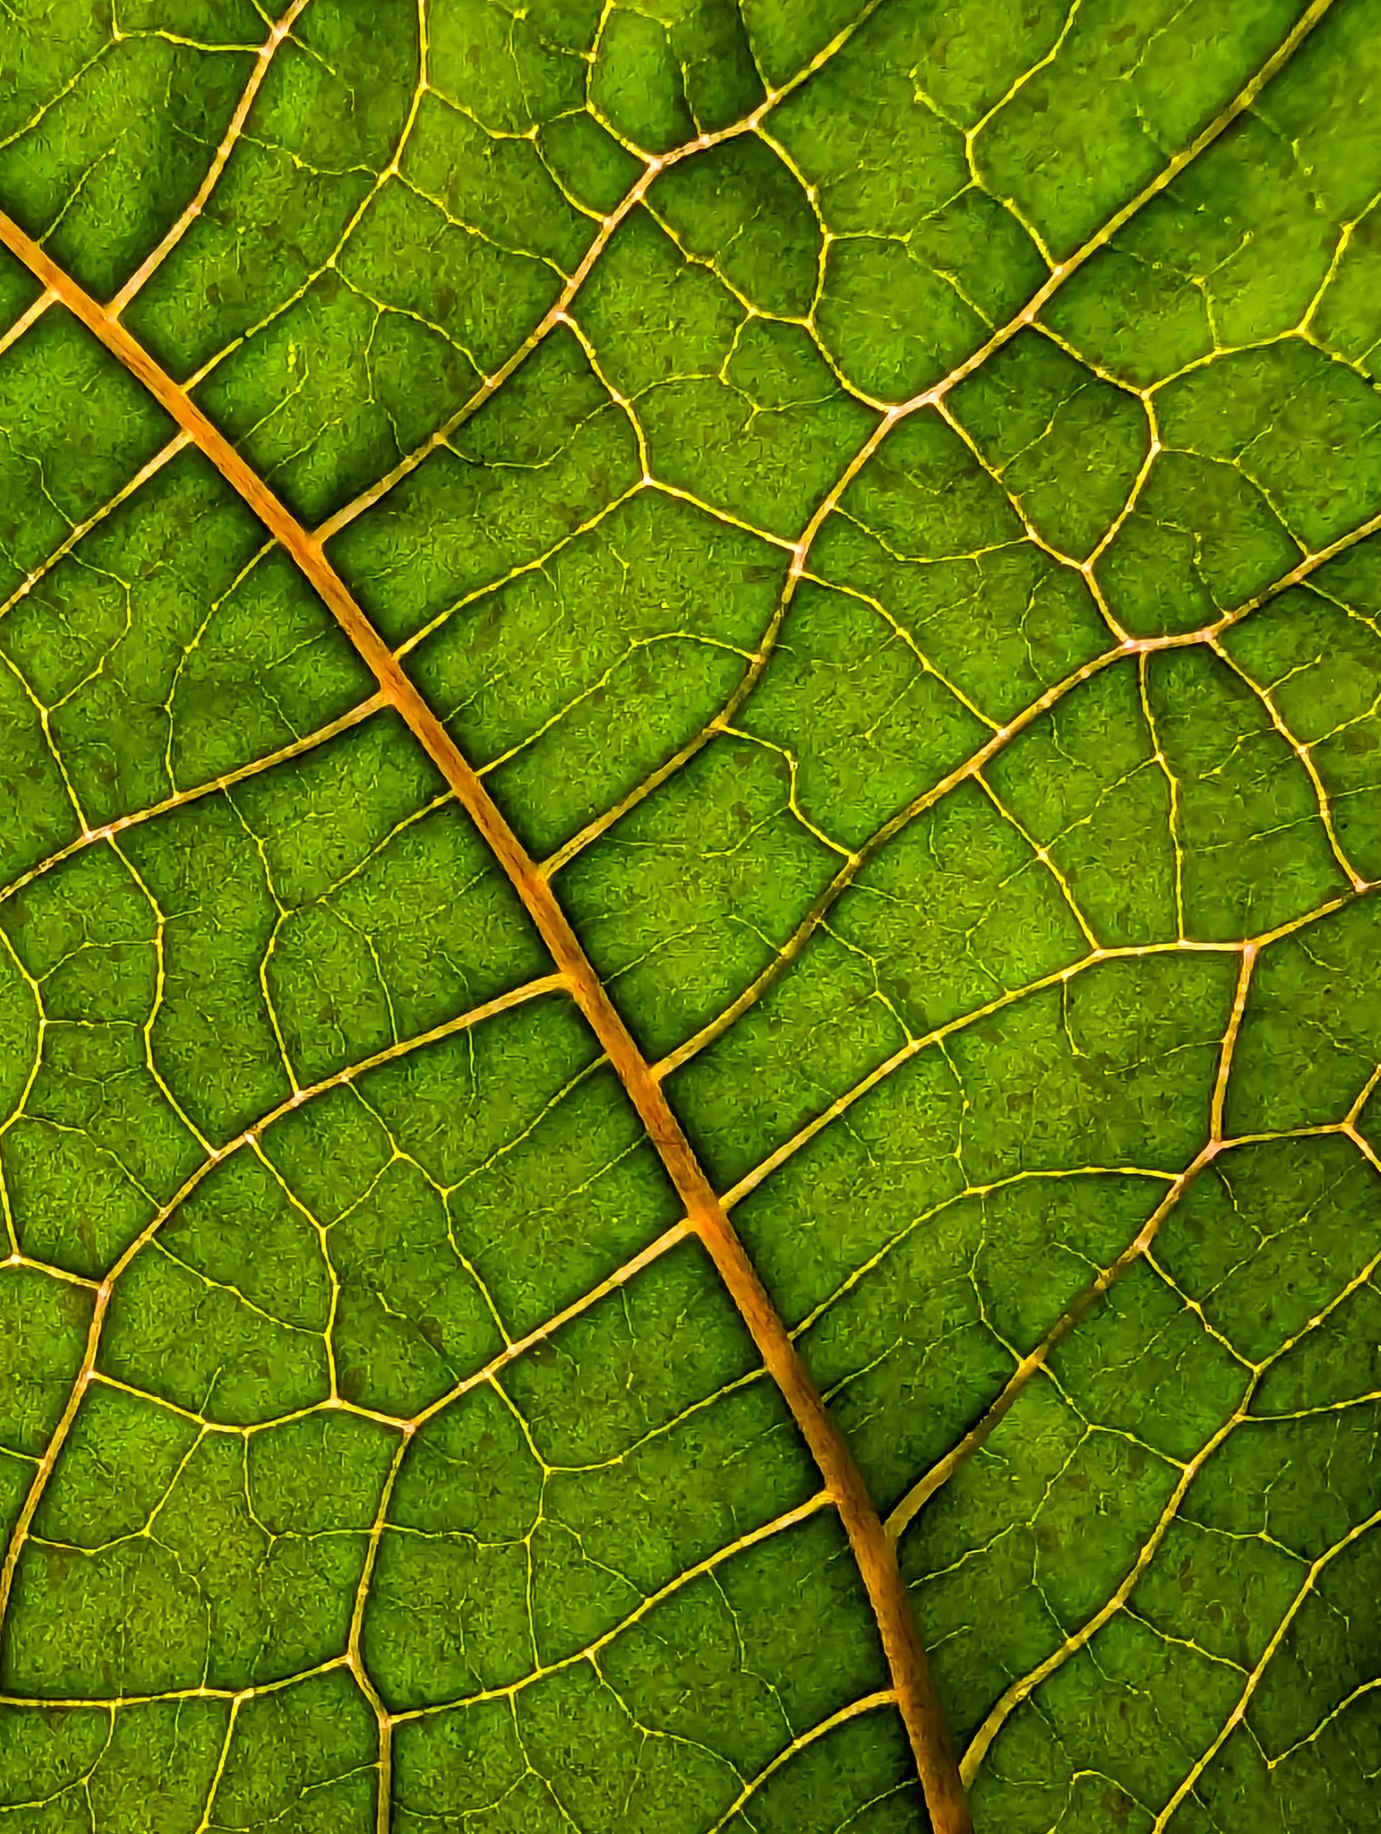 An image of a leaf with the sun behind, revealing the veins.